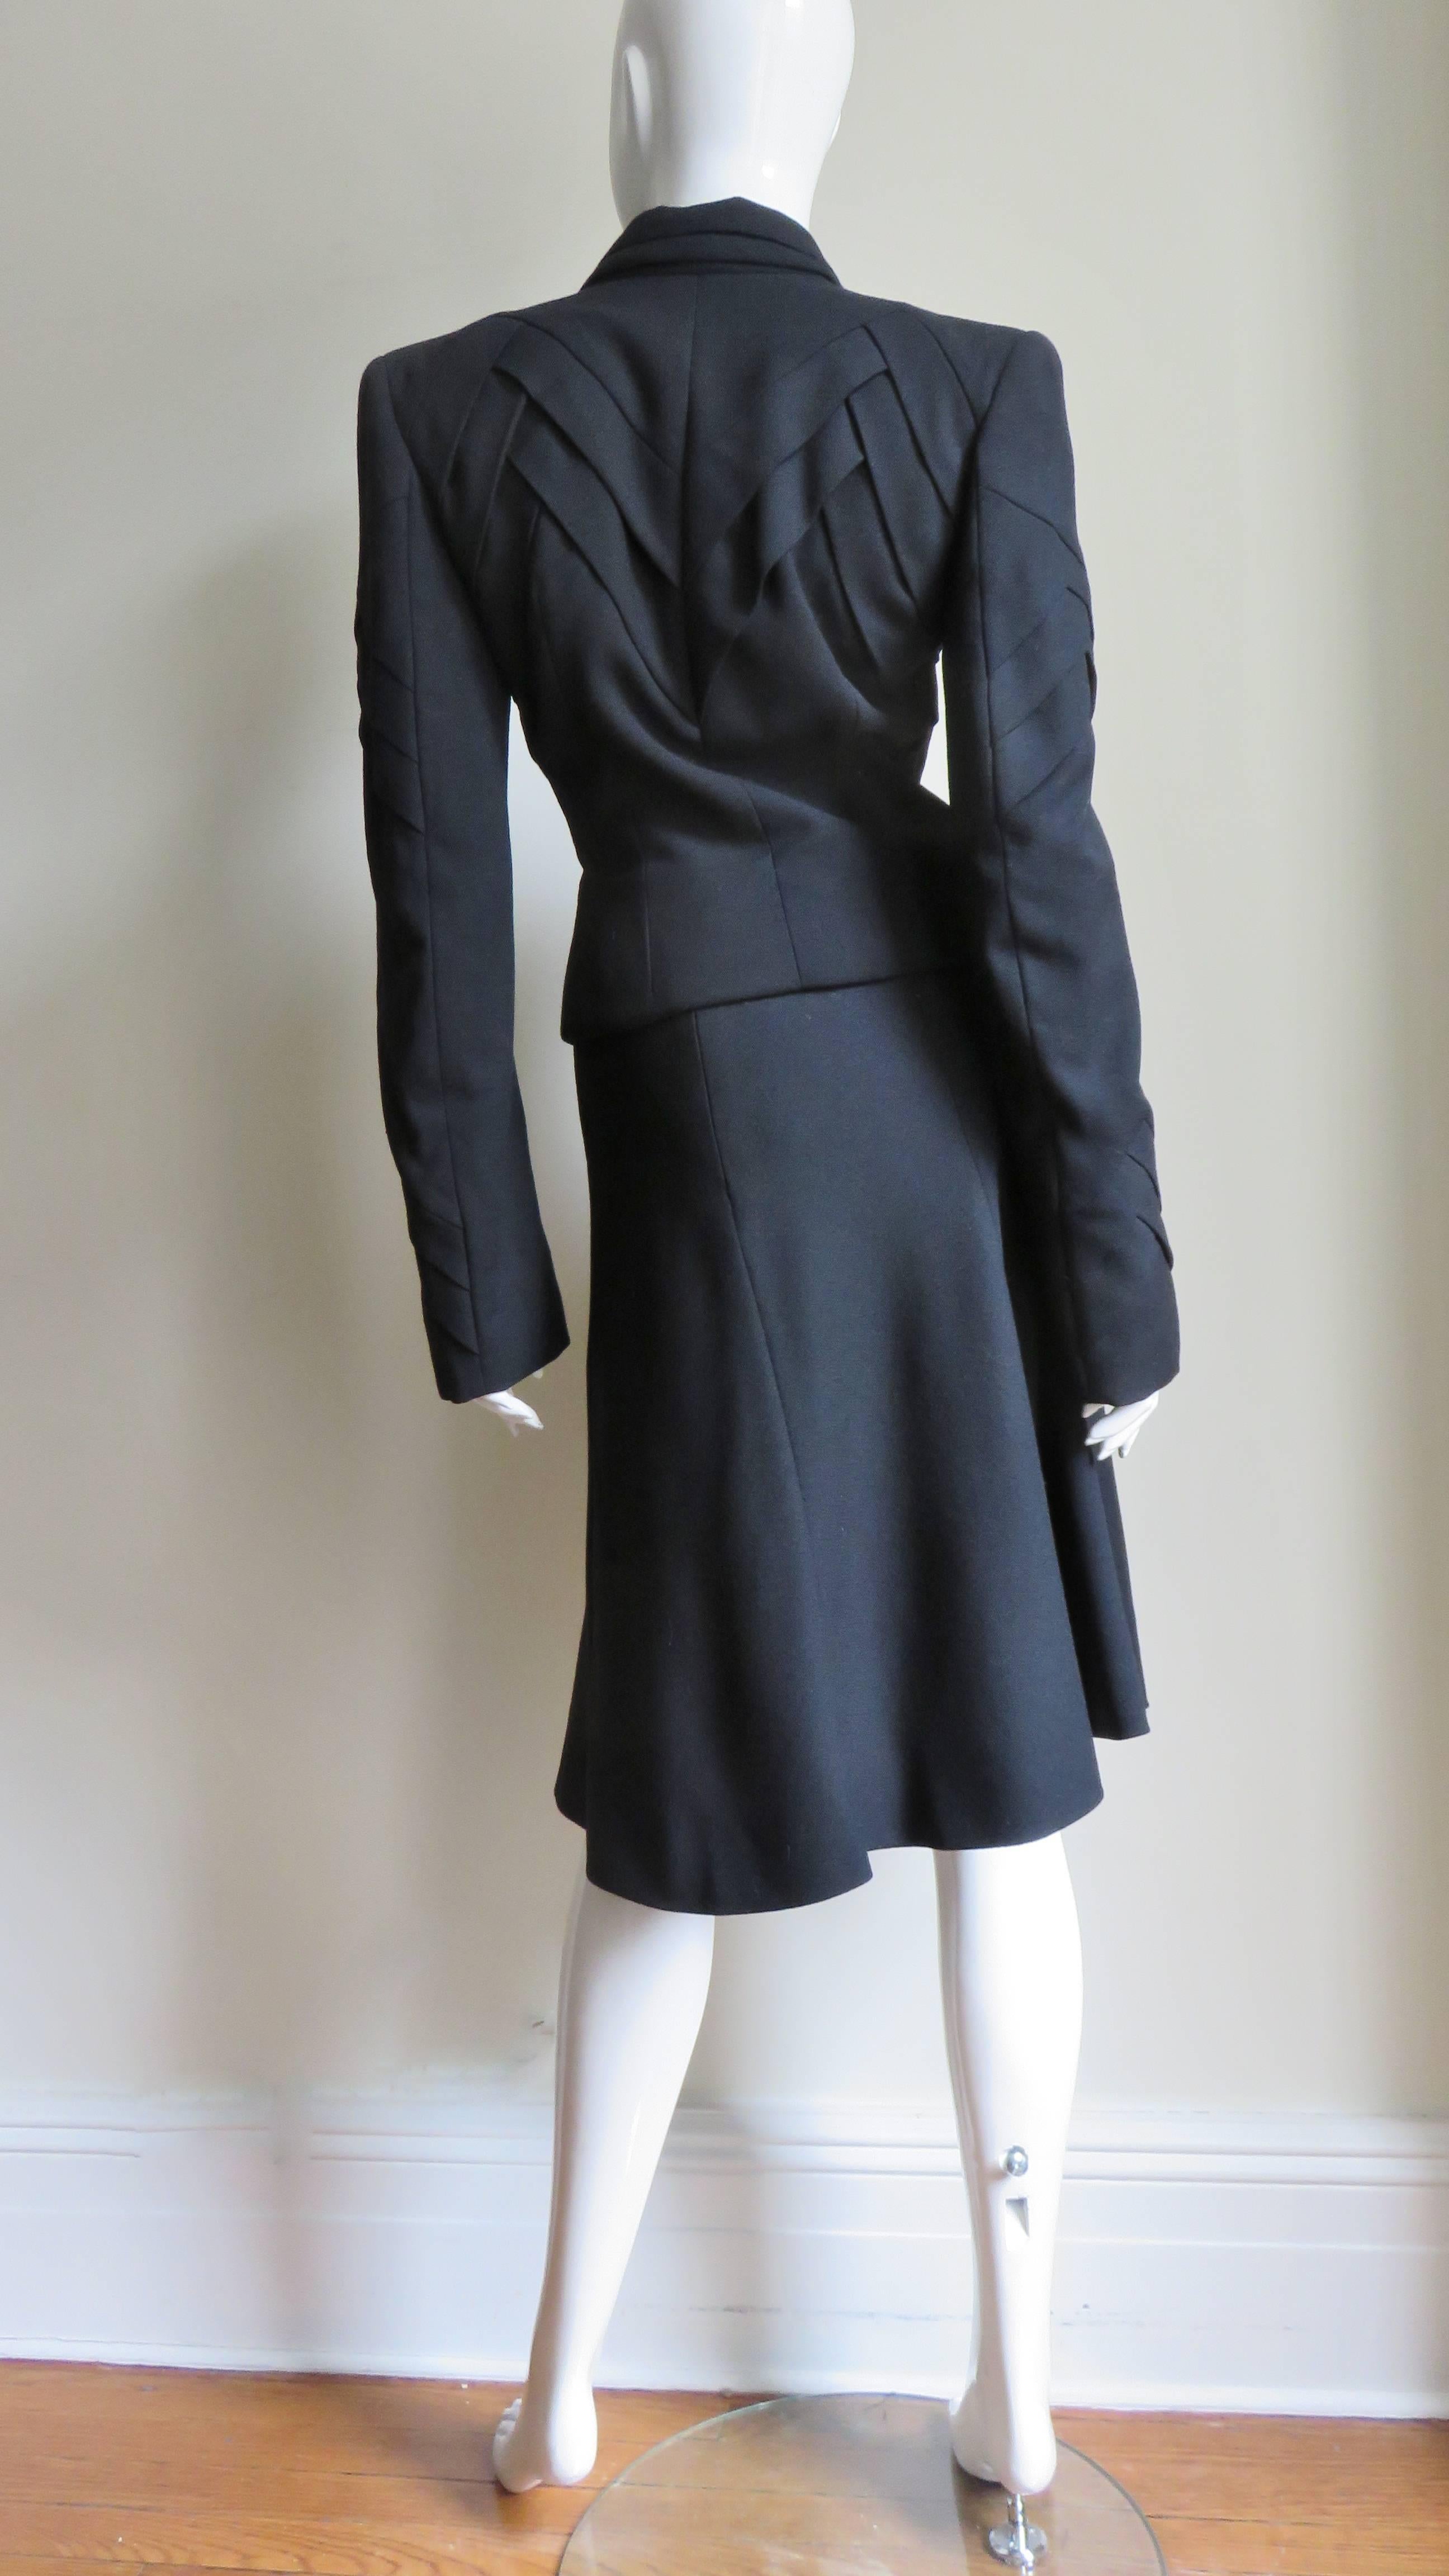 John Galliano New Runway Skirt Suit with Elaborate Detail 1990s For Sale 5